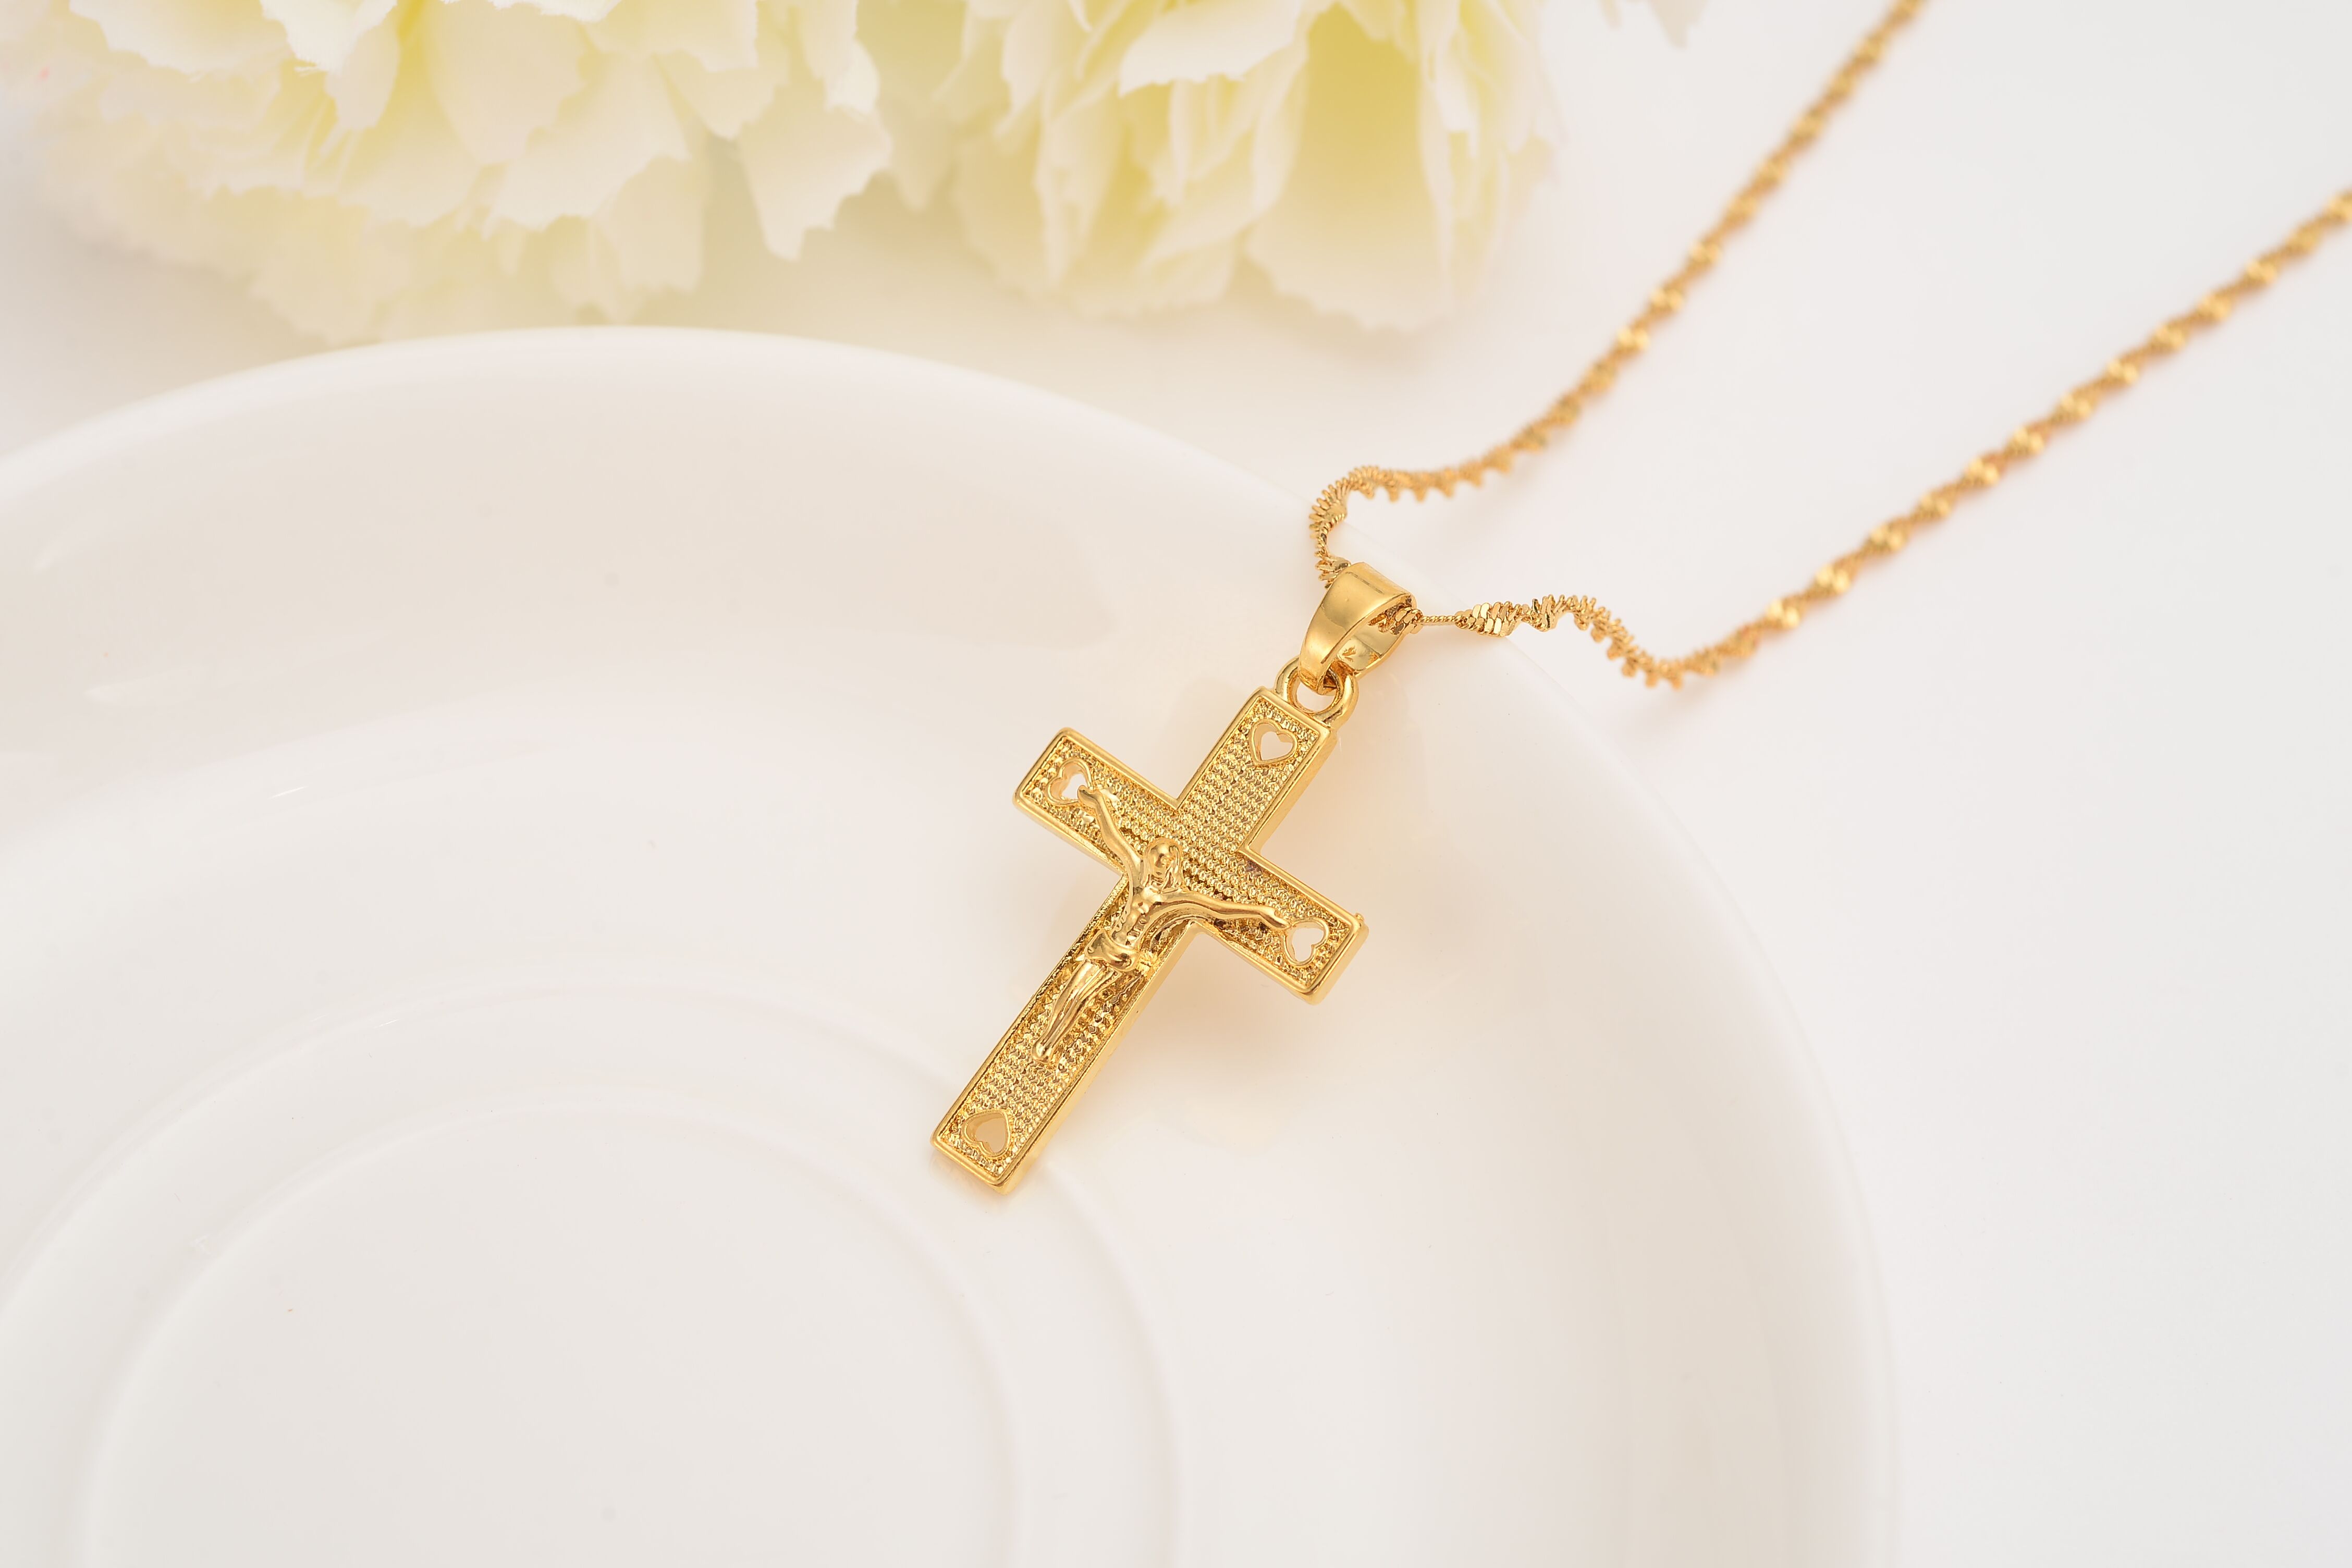 18K Yellow Gold Filled Necklace Jesus Cross Pendant 18"Chain Link GF Jewelry Hot